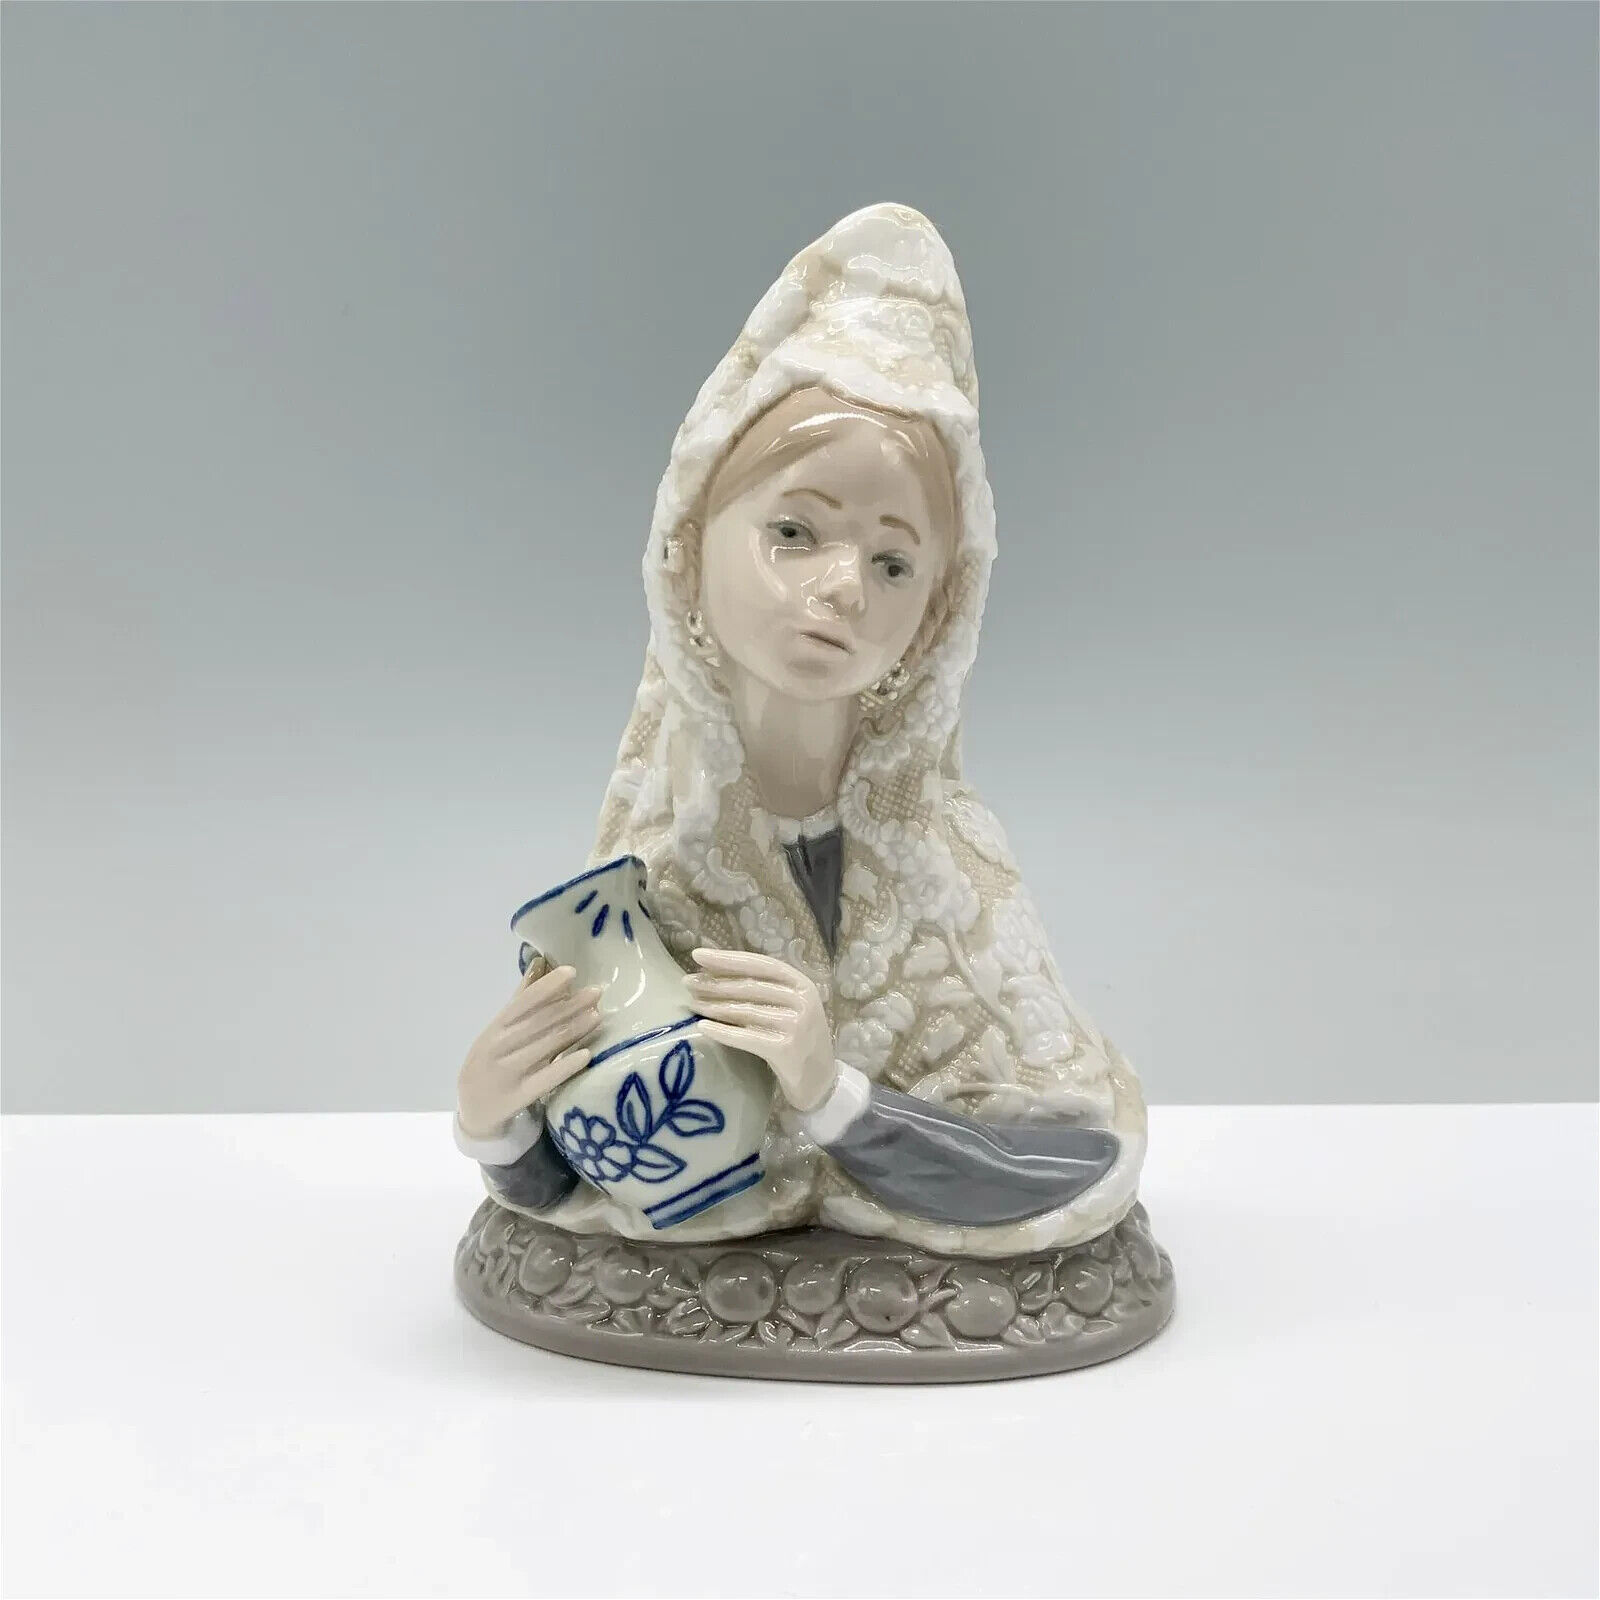 Lladro Porcelain Bust - Valencian Beauty 1005670 with Box